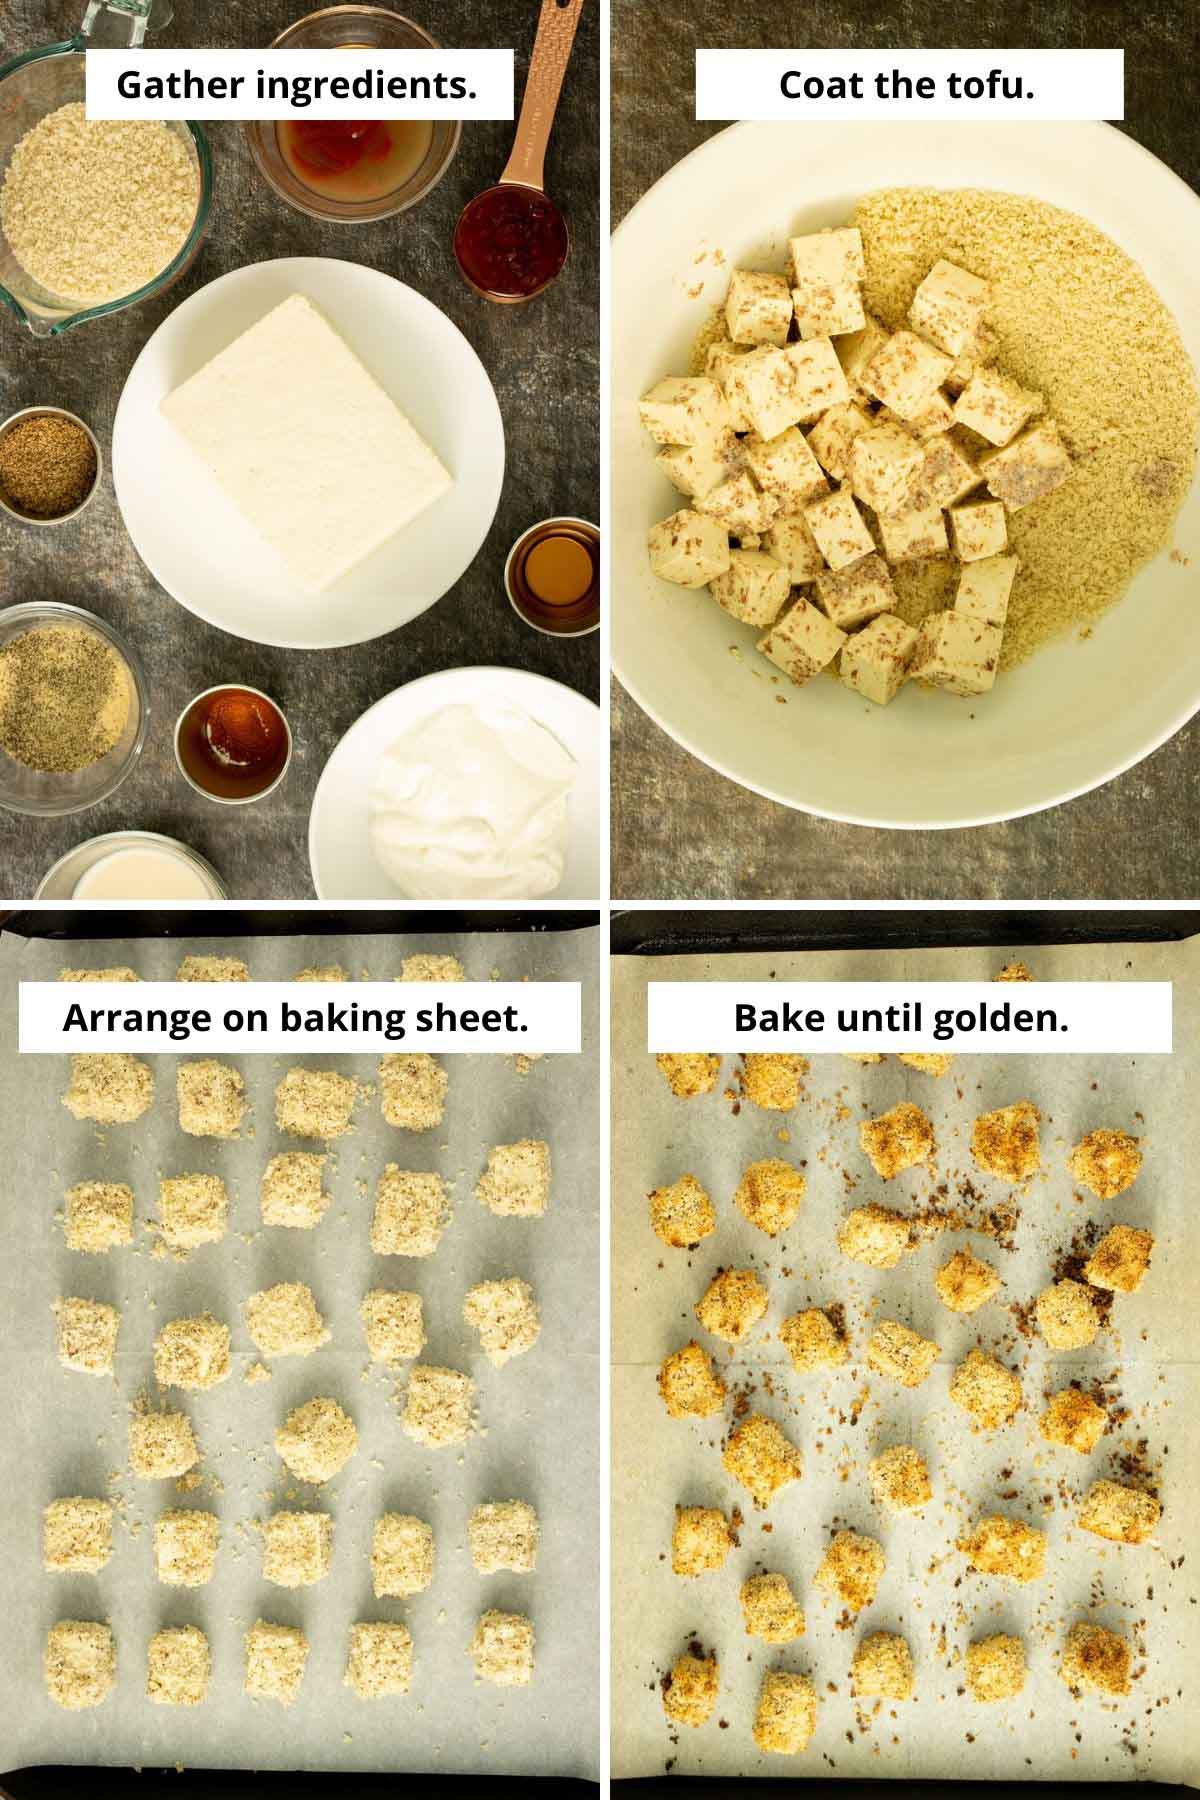 image collage showing ingredients, coating the tofu, and the tofu before and after baking